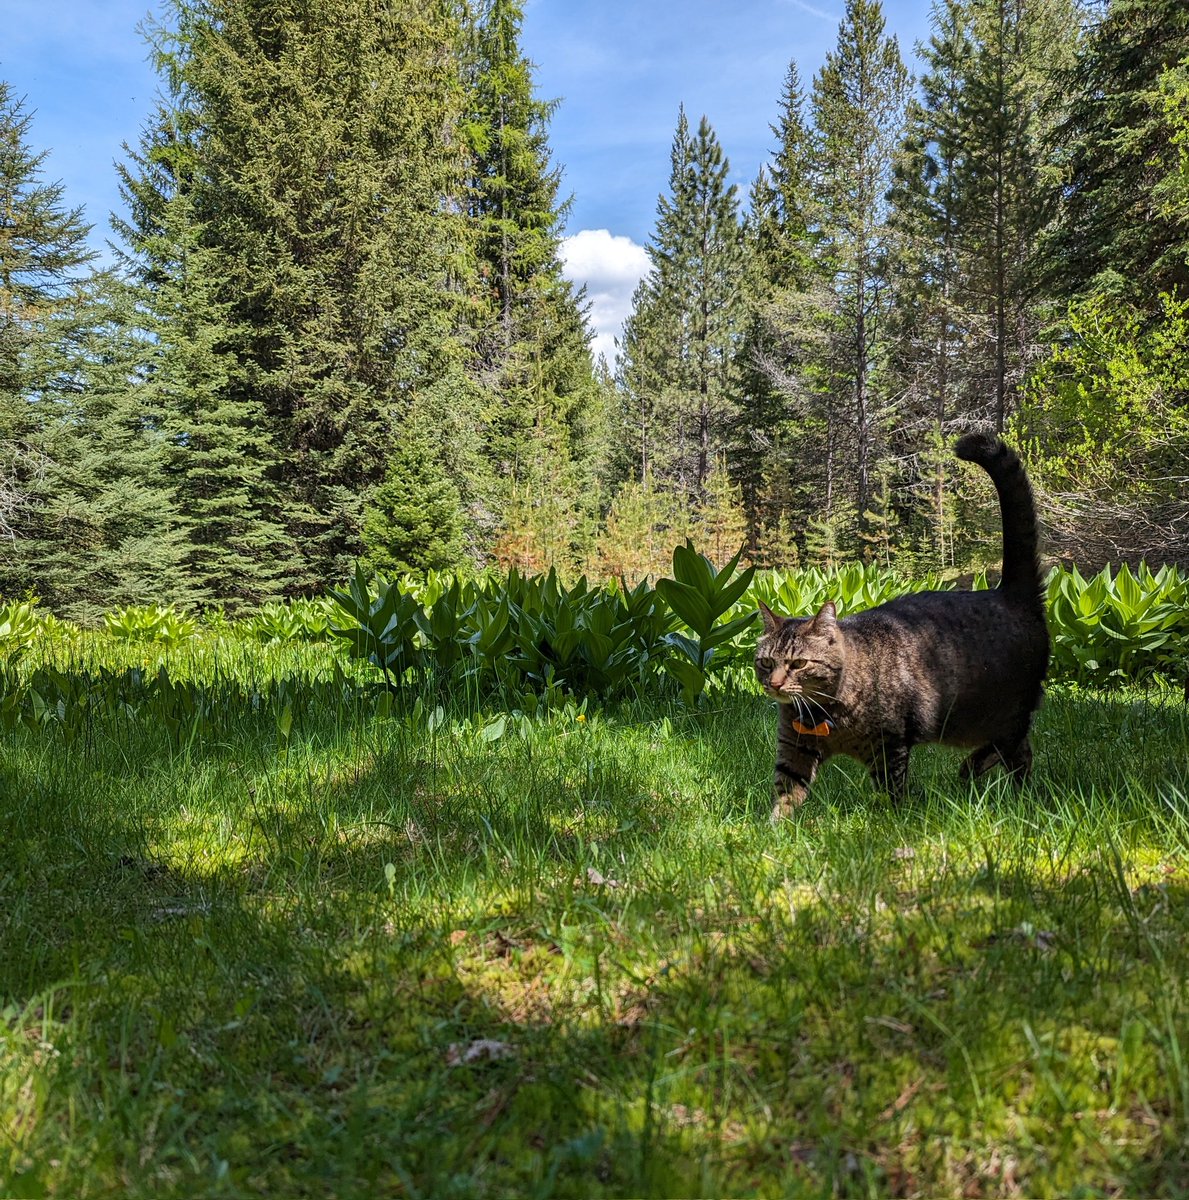 It's one of those spring days that we can't get enough of! 💚
Wallowa Whitman National Forest